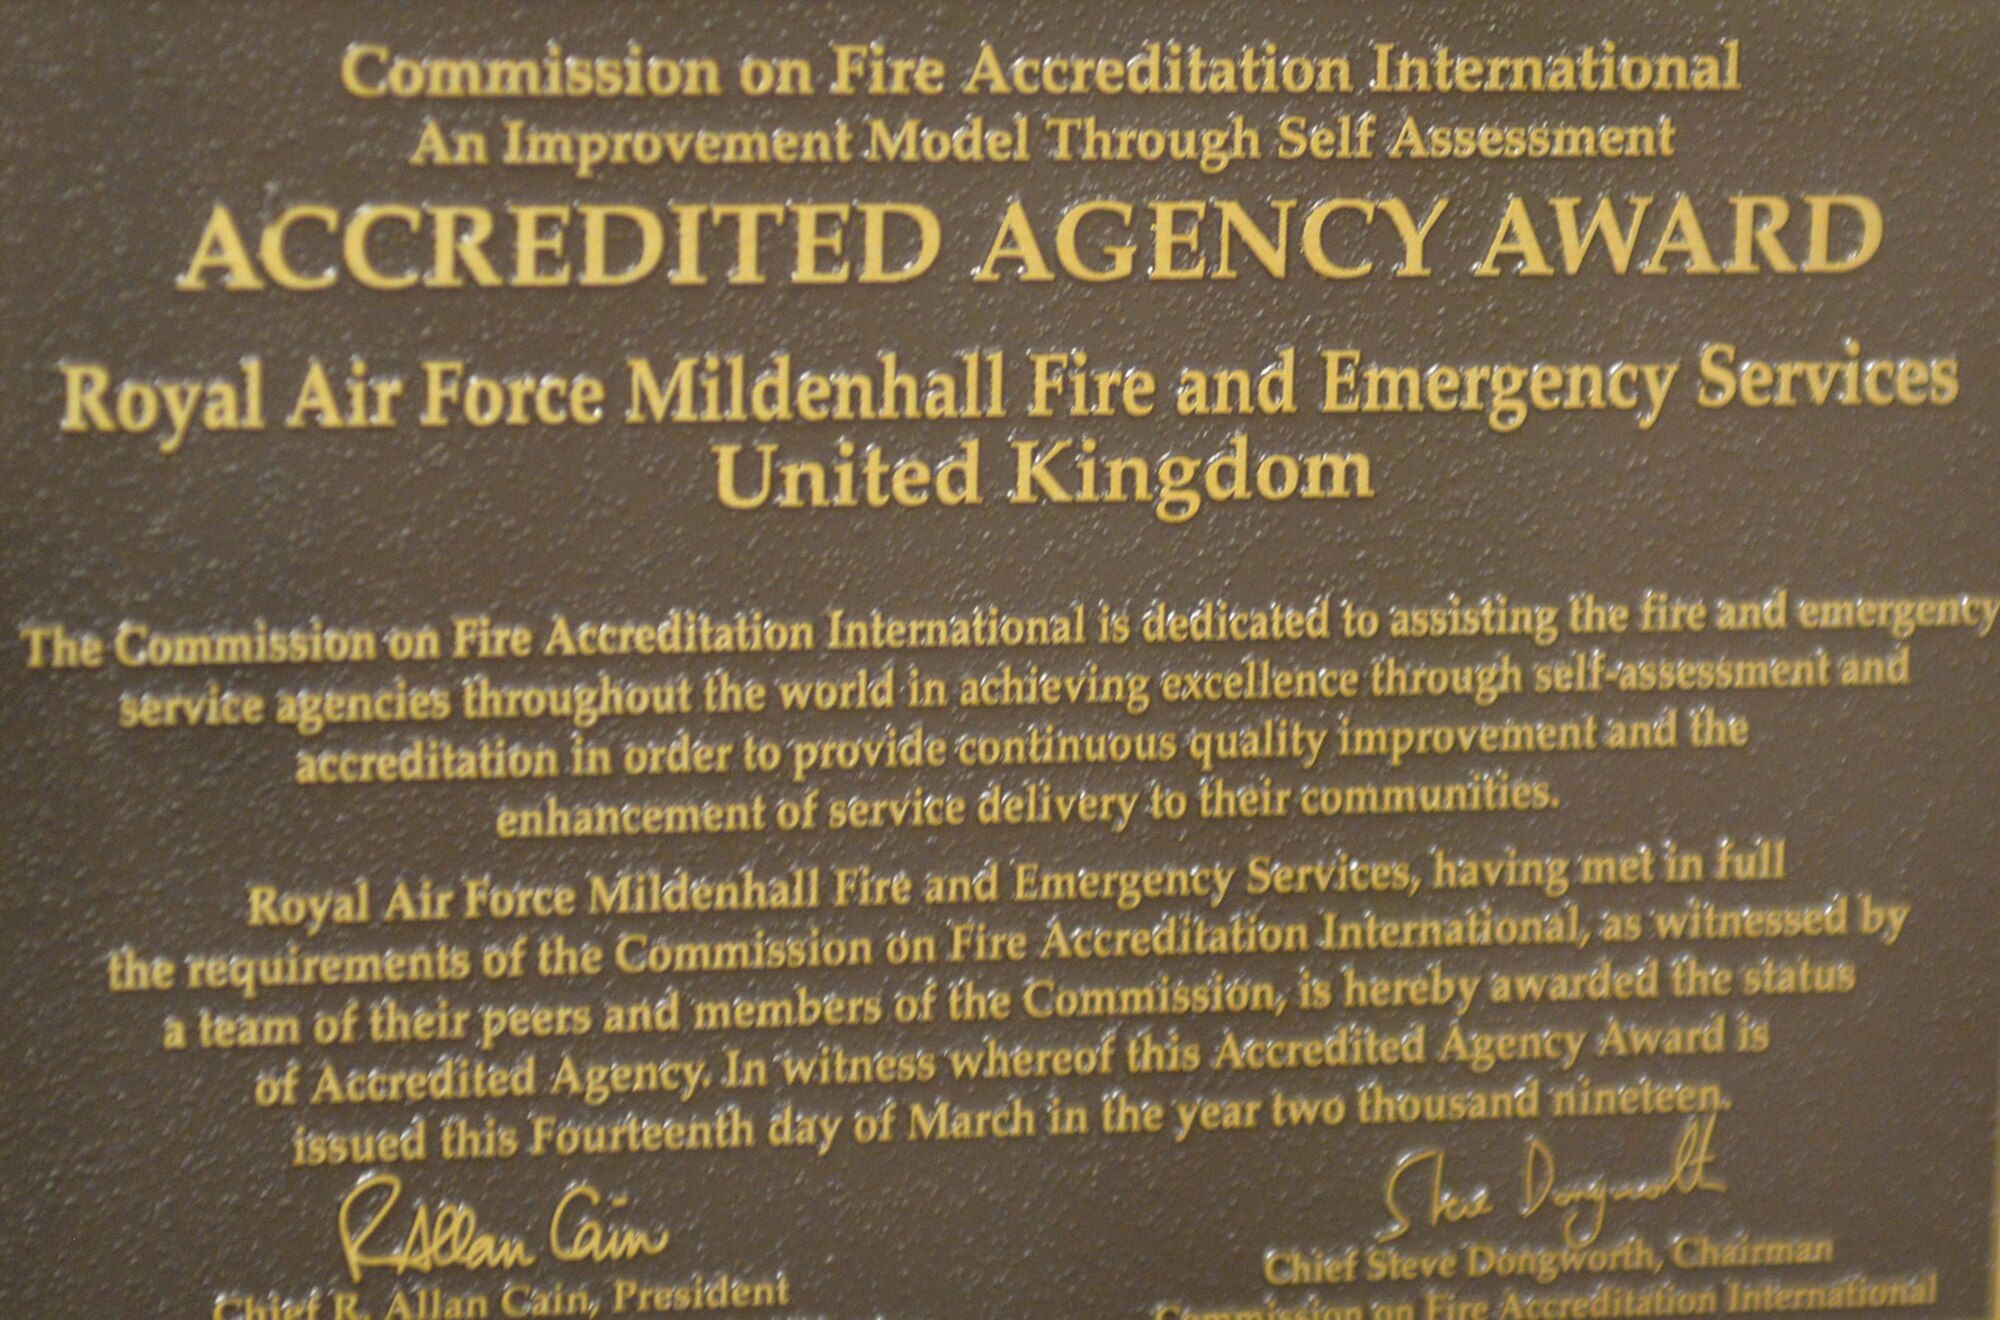 The Accredited Agency Award plaque was presented to the RAF Mildenhall Fire Department to show they went over and above in meeting all the requirements for this prestigious honor. In order to even be considered for accreditation, the fire department were inspected on more than 250 performance indicators and underwent a thorough peer assessment from a team of three municipal and one Department of Defense fire chiefs. (U.S. Air Force photo by Karen Abeyasekere)